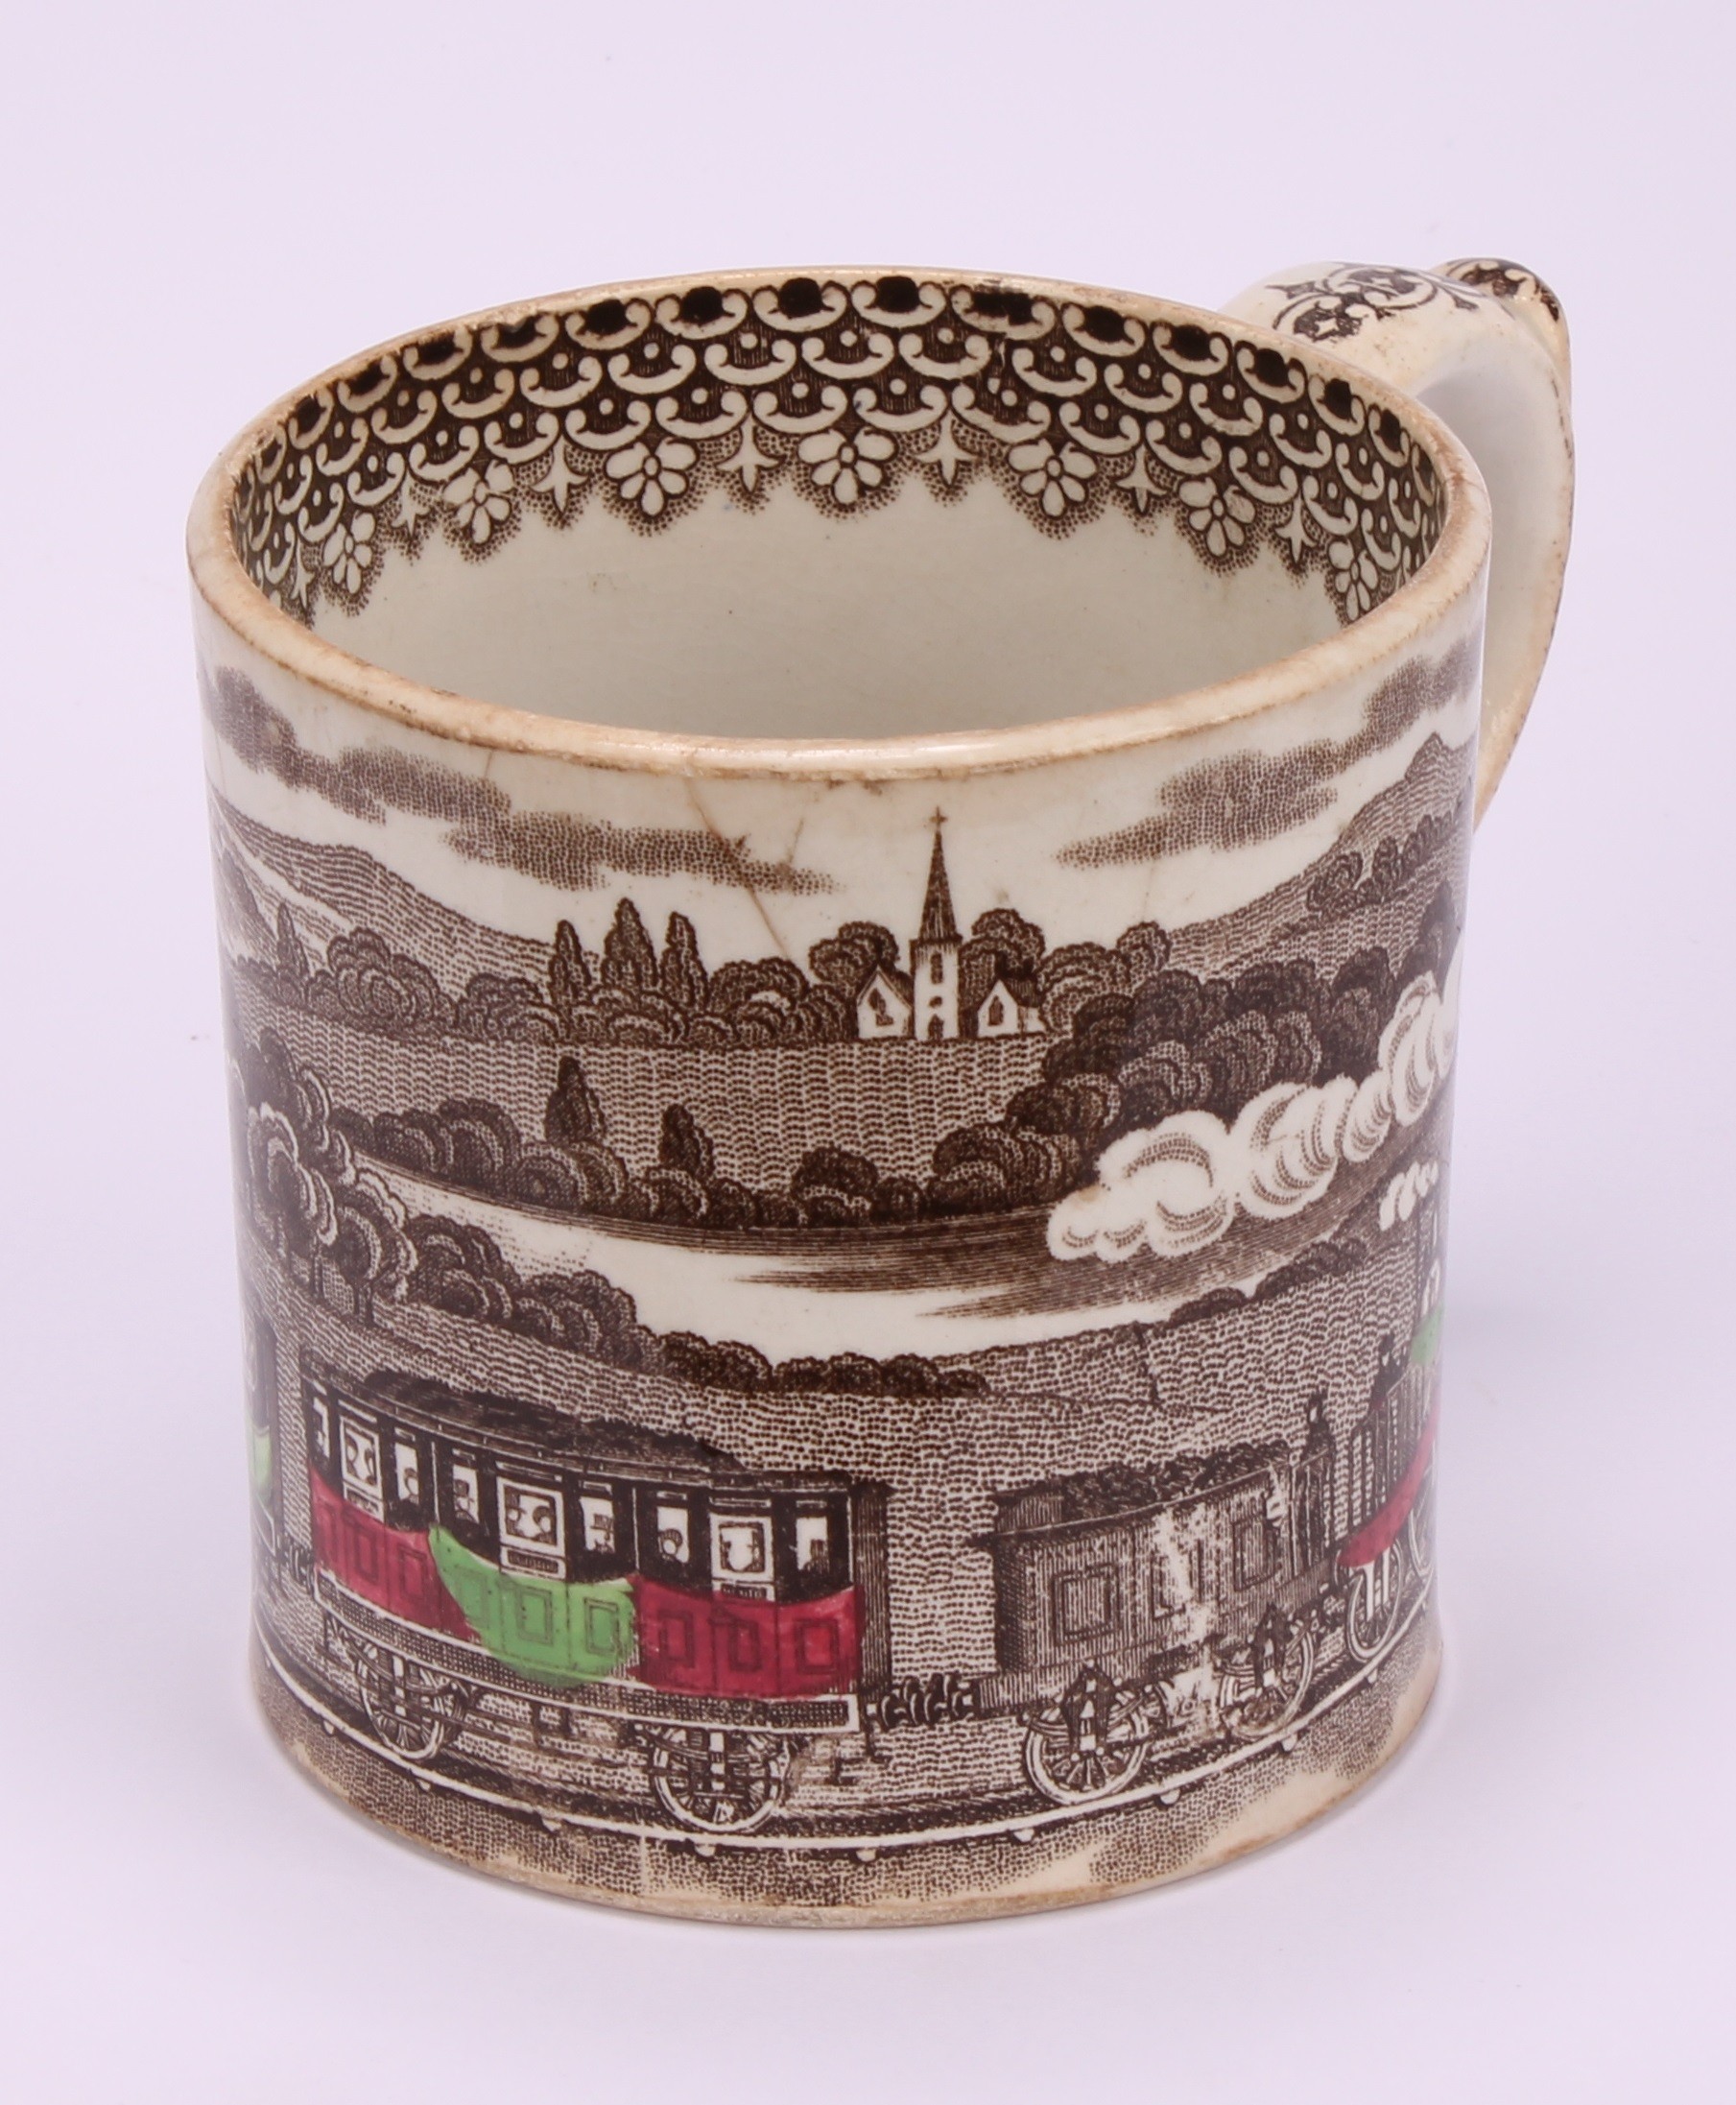 Railway Interest - steam locomotives, a 19th century Staffordshire pearlware mug, printed in sepia - Image 6 of 10